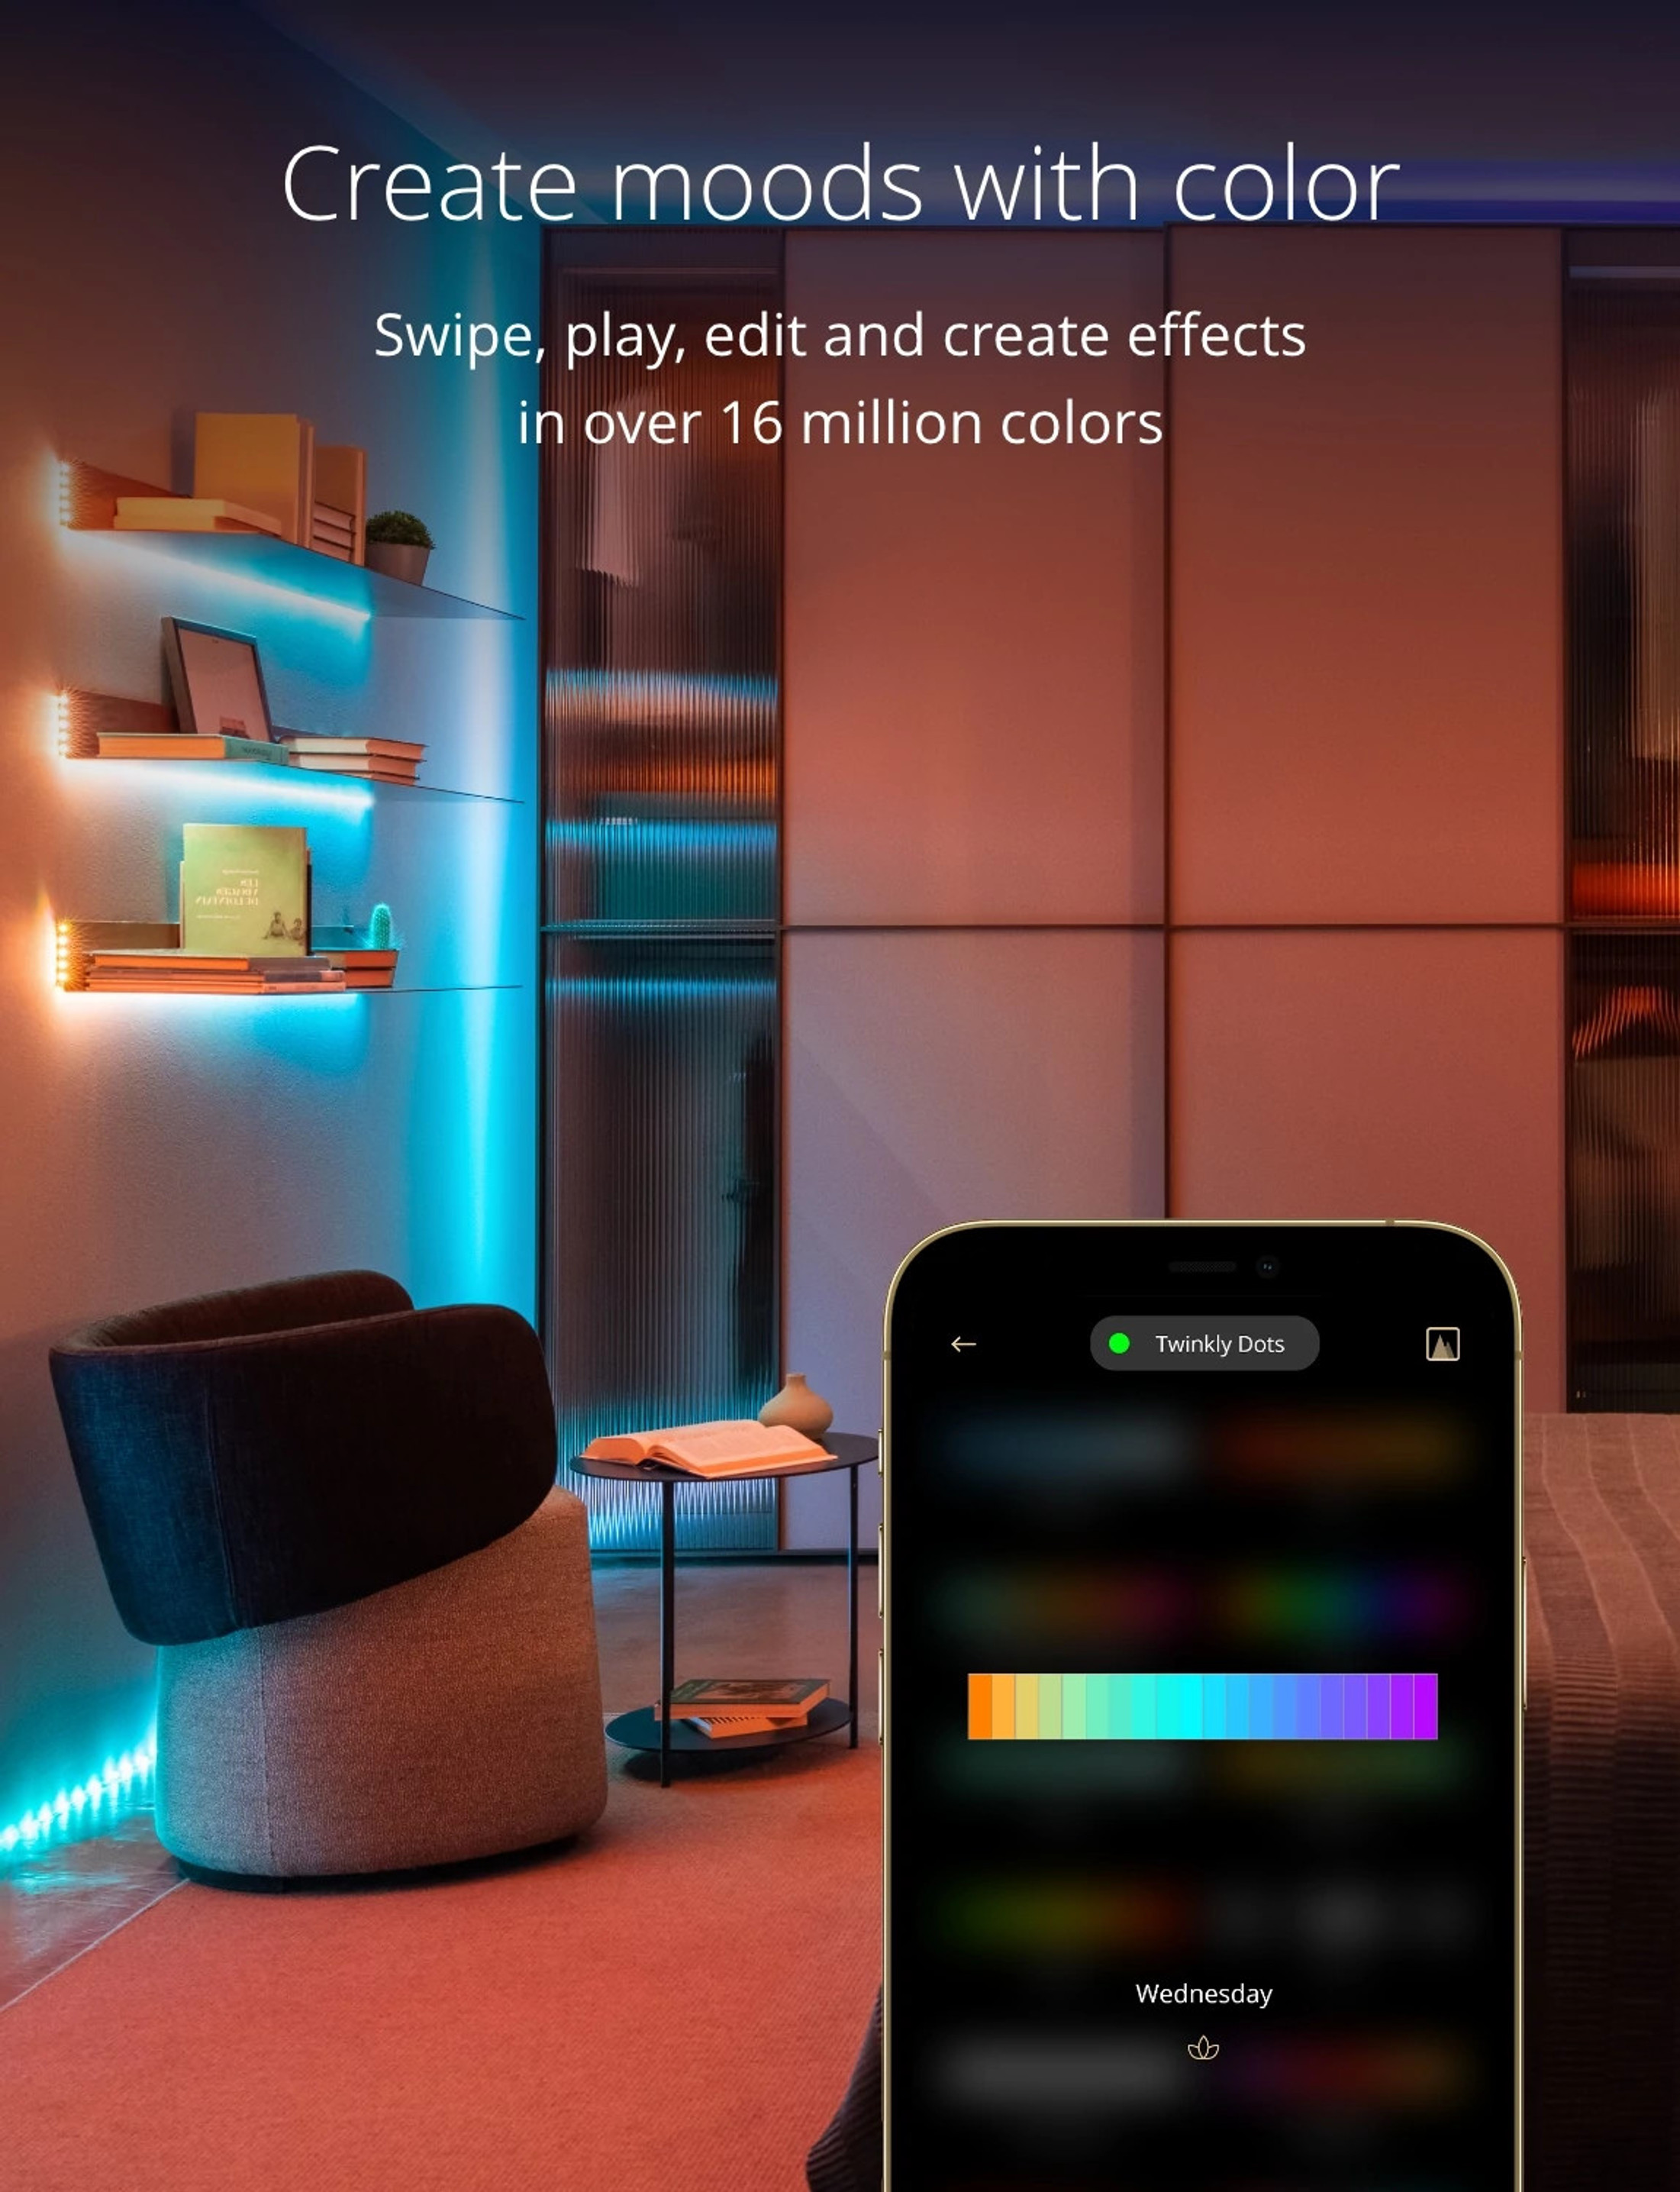 Twinkly Dots App-Controlled Flexible LED Light String with RGB (16 Million Colors) LEDs Indoor and Outdoor Smart Home Lighting Decoration